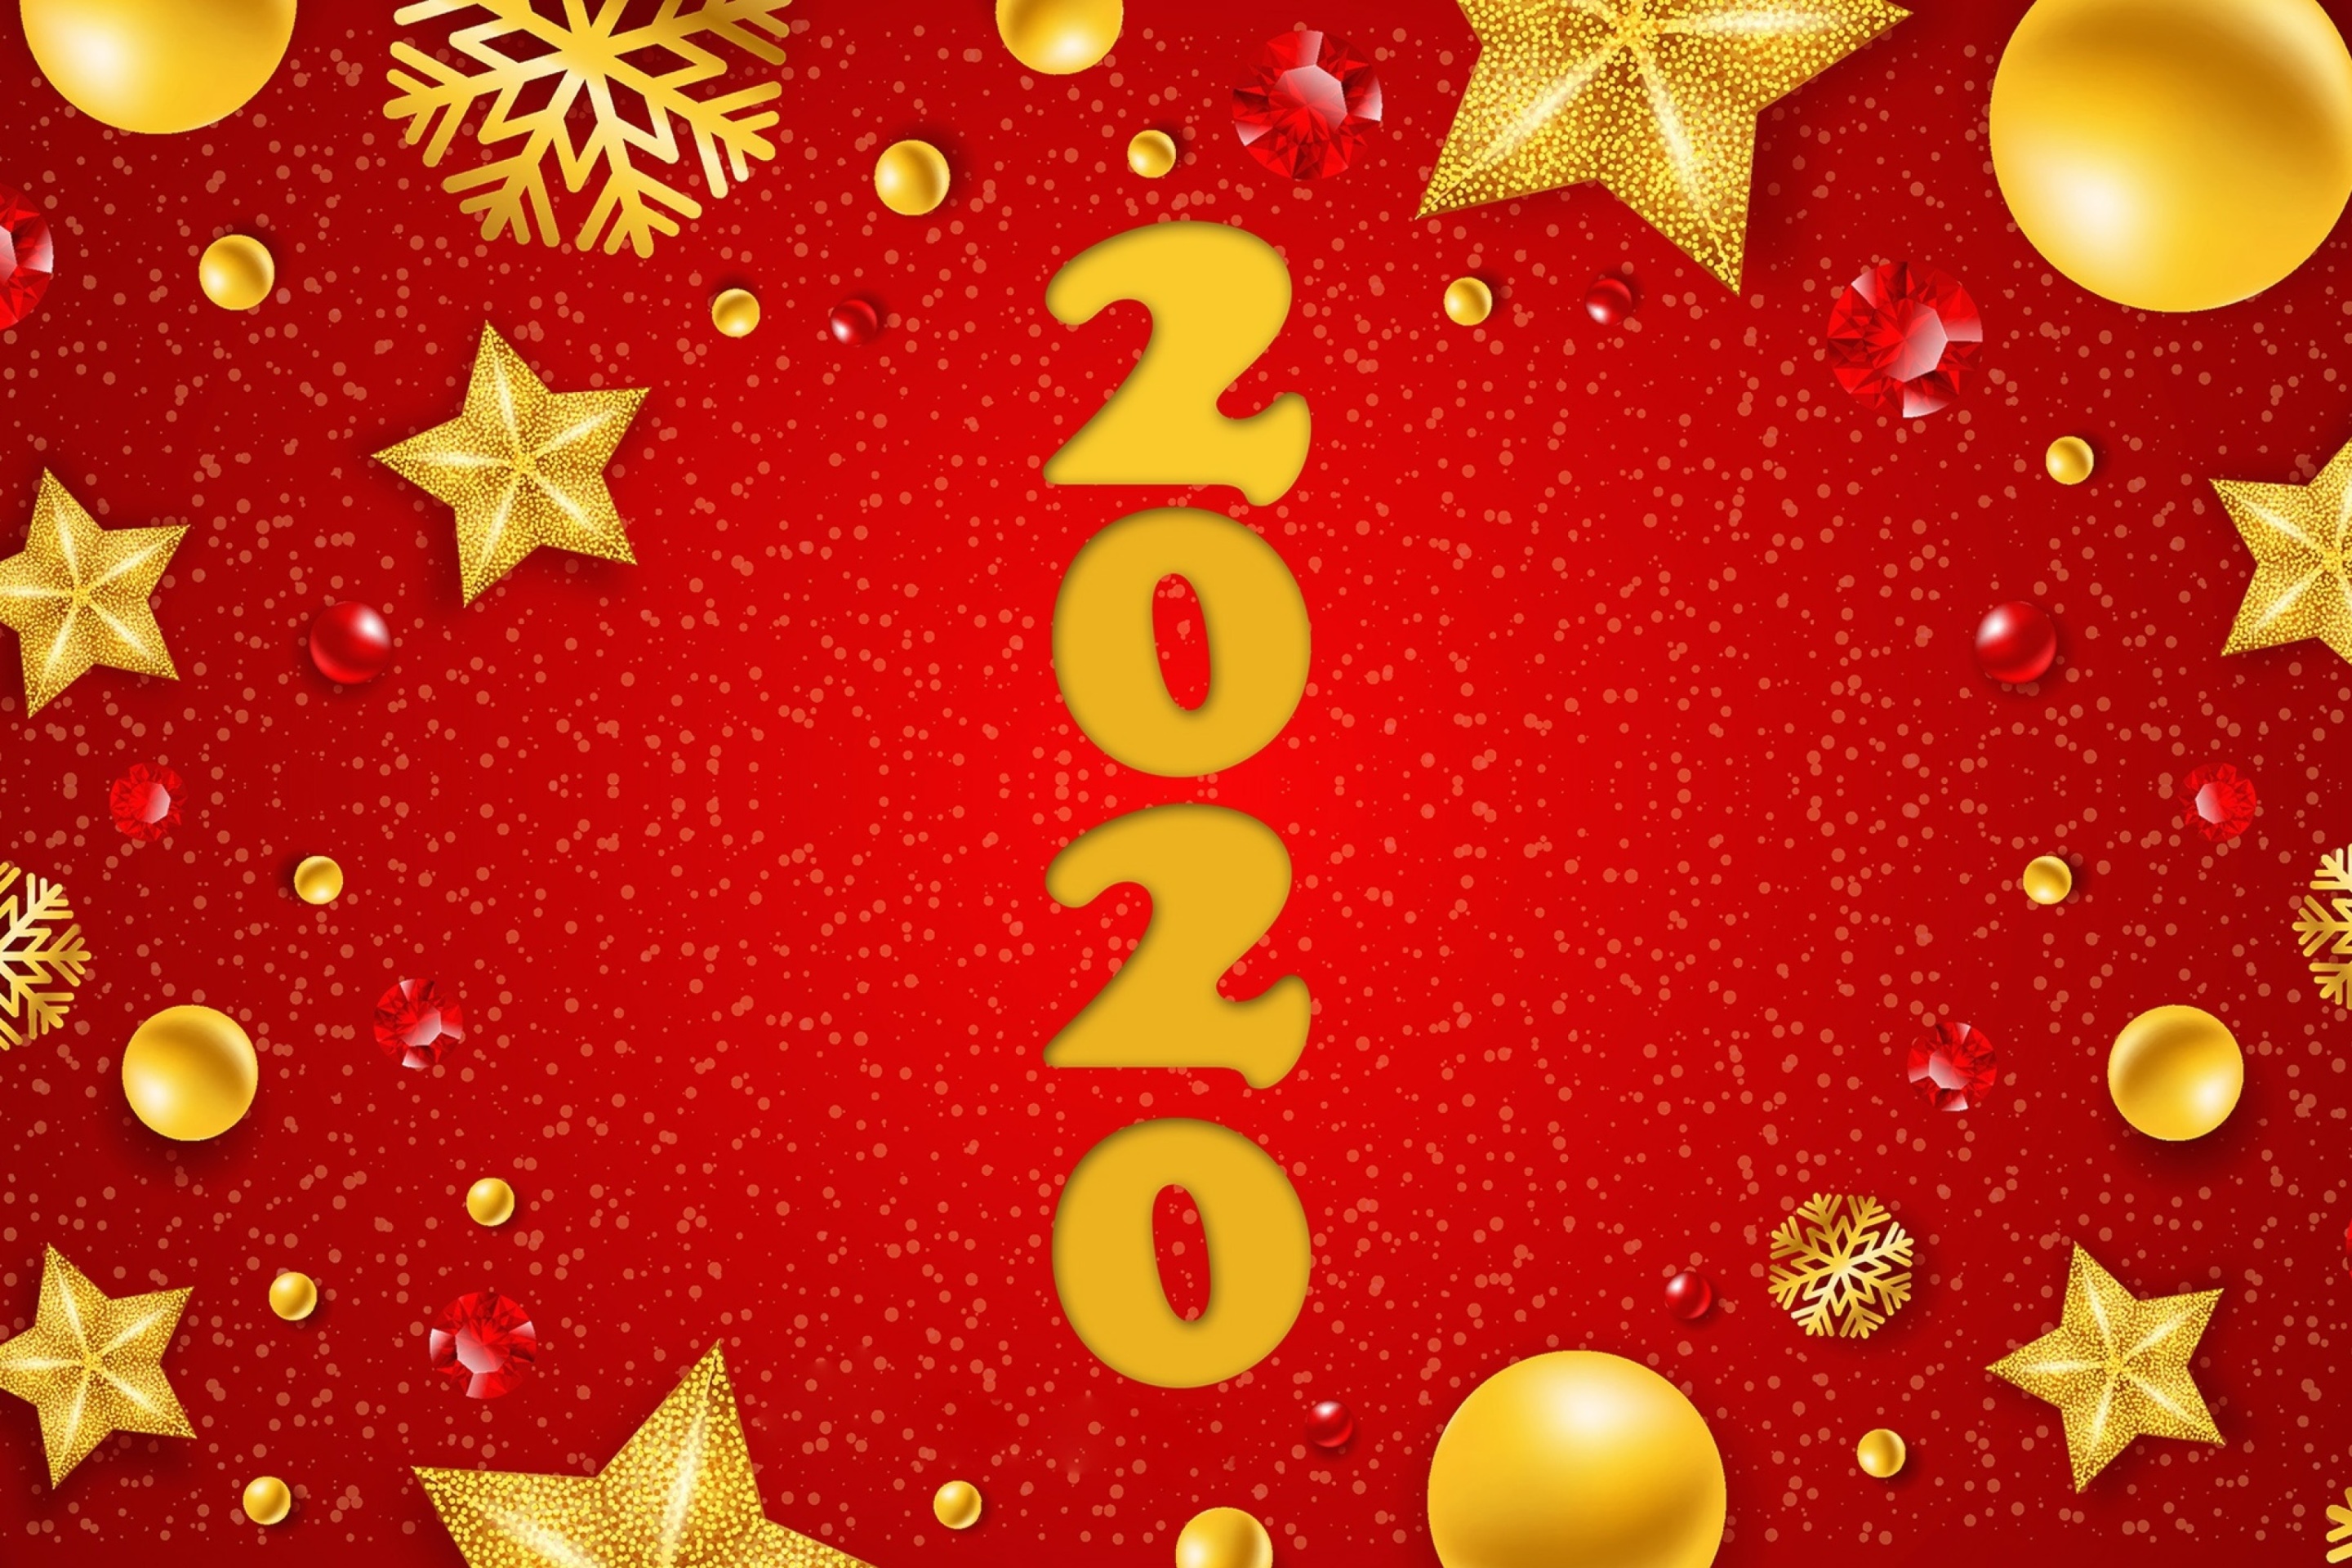 Happy New Year 2020 Messages screenshot #1 2880x1920